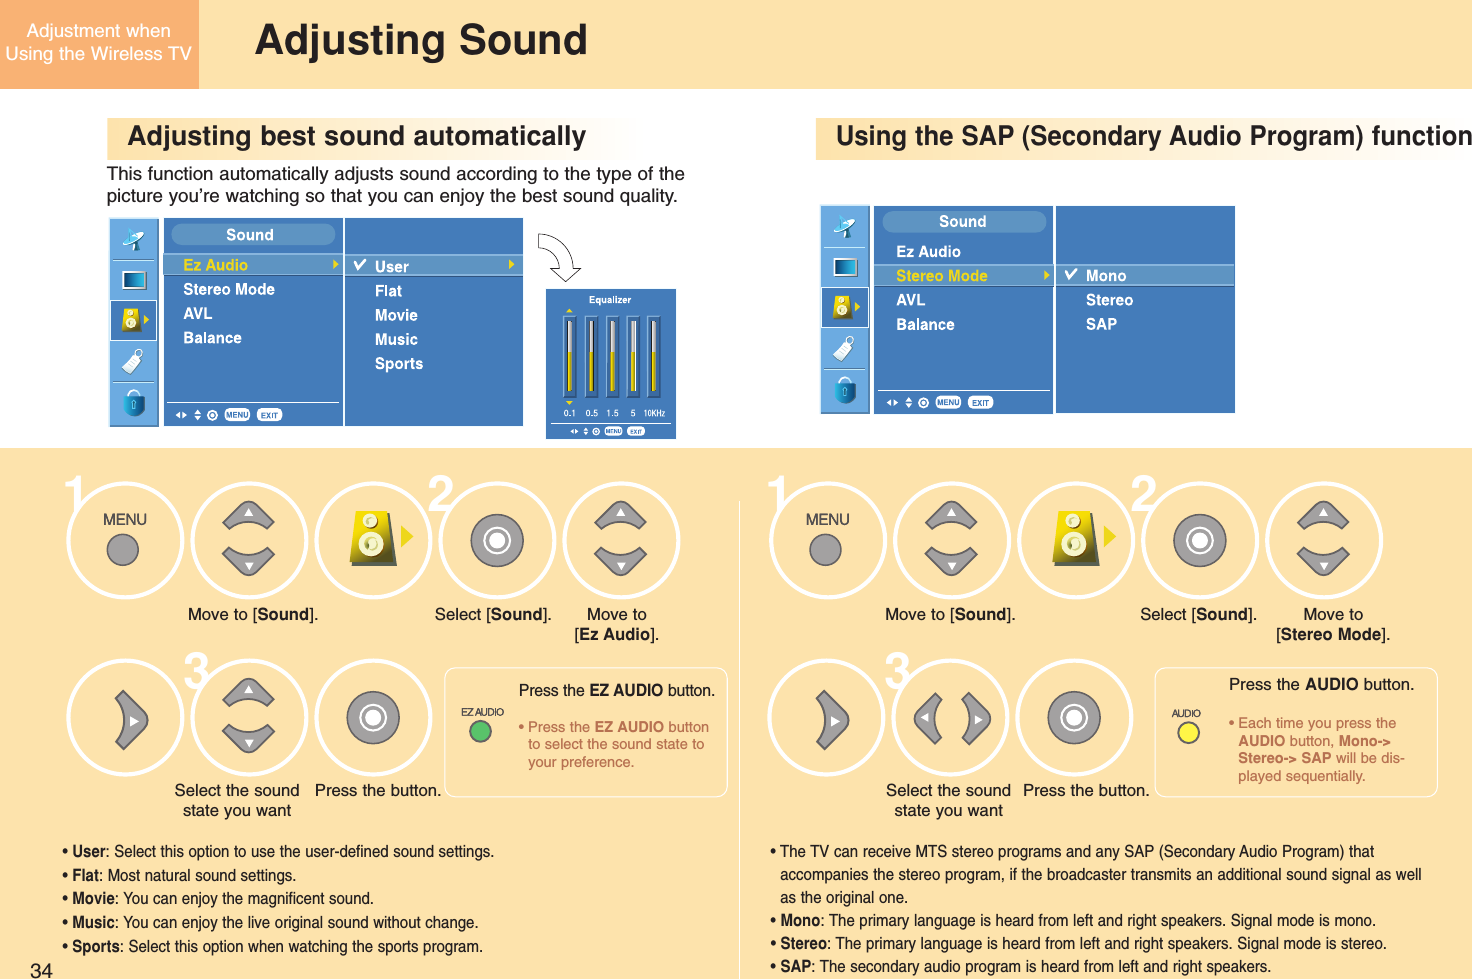 34Adjustment whenUsing the Wireless TV Adjusting SoundAdjusting best sound automaticallyUsing the SAP (Secondary Audio Program) functionThis function automatically adjusts sound according to the type of the picture you’re watching so that you can enjoy the best sound quality.Move to [Sound].Press the button.Select the soundstate you want• User: Select this option to use the user-defined sound settings. • Flat: Most natural sound settings. • Movie: You can enjoy the magnificent sound.• Music: You can enjoy the live original sound without change. • Sports: Select this option when watching the sports program.• The TV can receive MTS stereo programs and any SAP (Secondary Audio Program) thataccompanies the stereo program, if the broadcaster transmits an additional sound signal as wellas the original one. • Mono: The primary language is heard from left and right speakers. Signal mode is mono. • Stereo: The primary language is heard from left and right speakers. Signal mode is stereo. • SAP: The secondary audio program is heard from left and right speakers. Select [Sound]. Move to [Sound].Select the soundstate you wantPress the button.Select [Sound]. Move to[Stereo Mode].Move to [Ez Audio].132312Press the EZ AUDIO button.• Press the EZ AUDIO buttonto select the sound state toyour preference.Press the AUDIO button.• Each time you press theAUDIO button, Mono-&gt;Stereo-&gt; SAP will be dis-played sequentially.